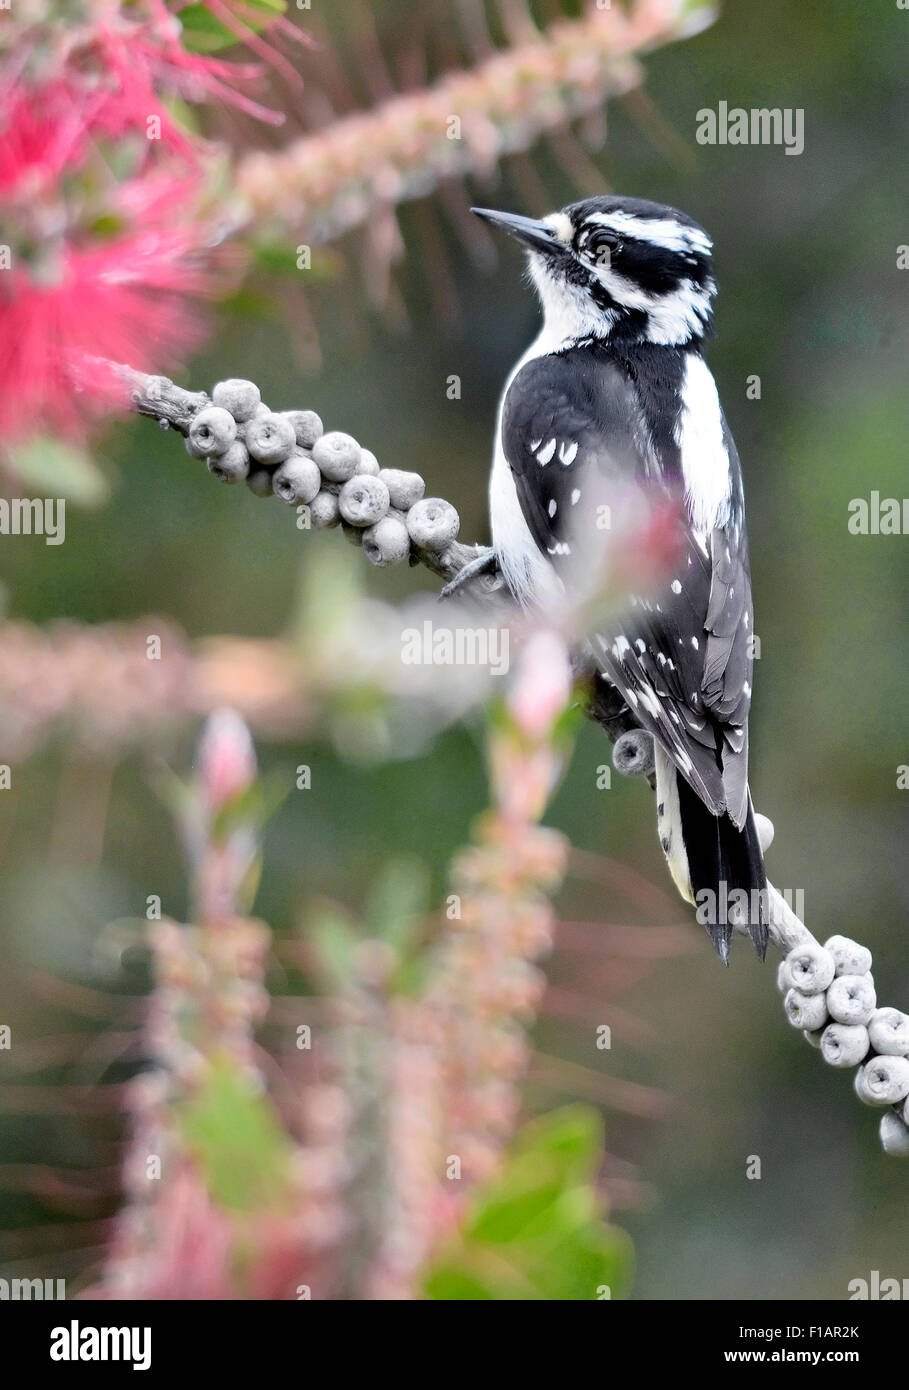 A Downy Woodpecker bird- Picoides Pubescens, perched on a branch, pictured against a blurred background. Stock Photo